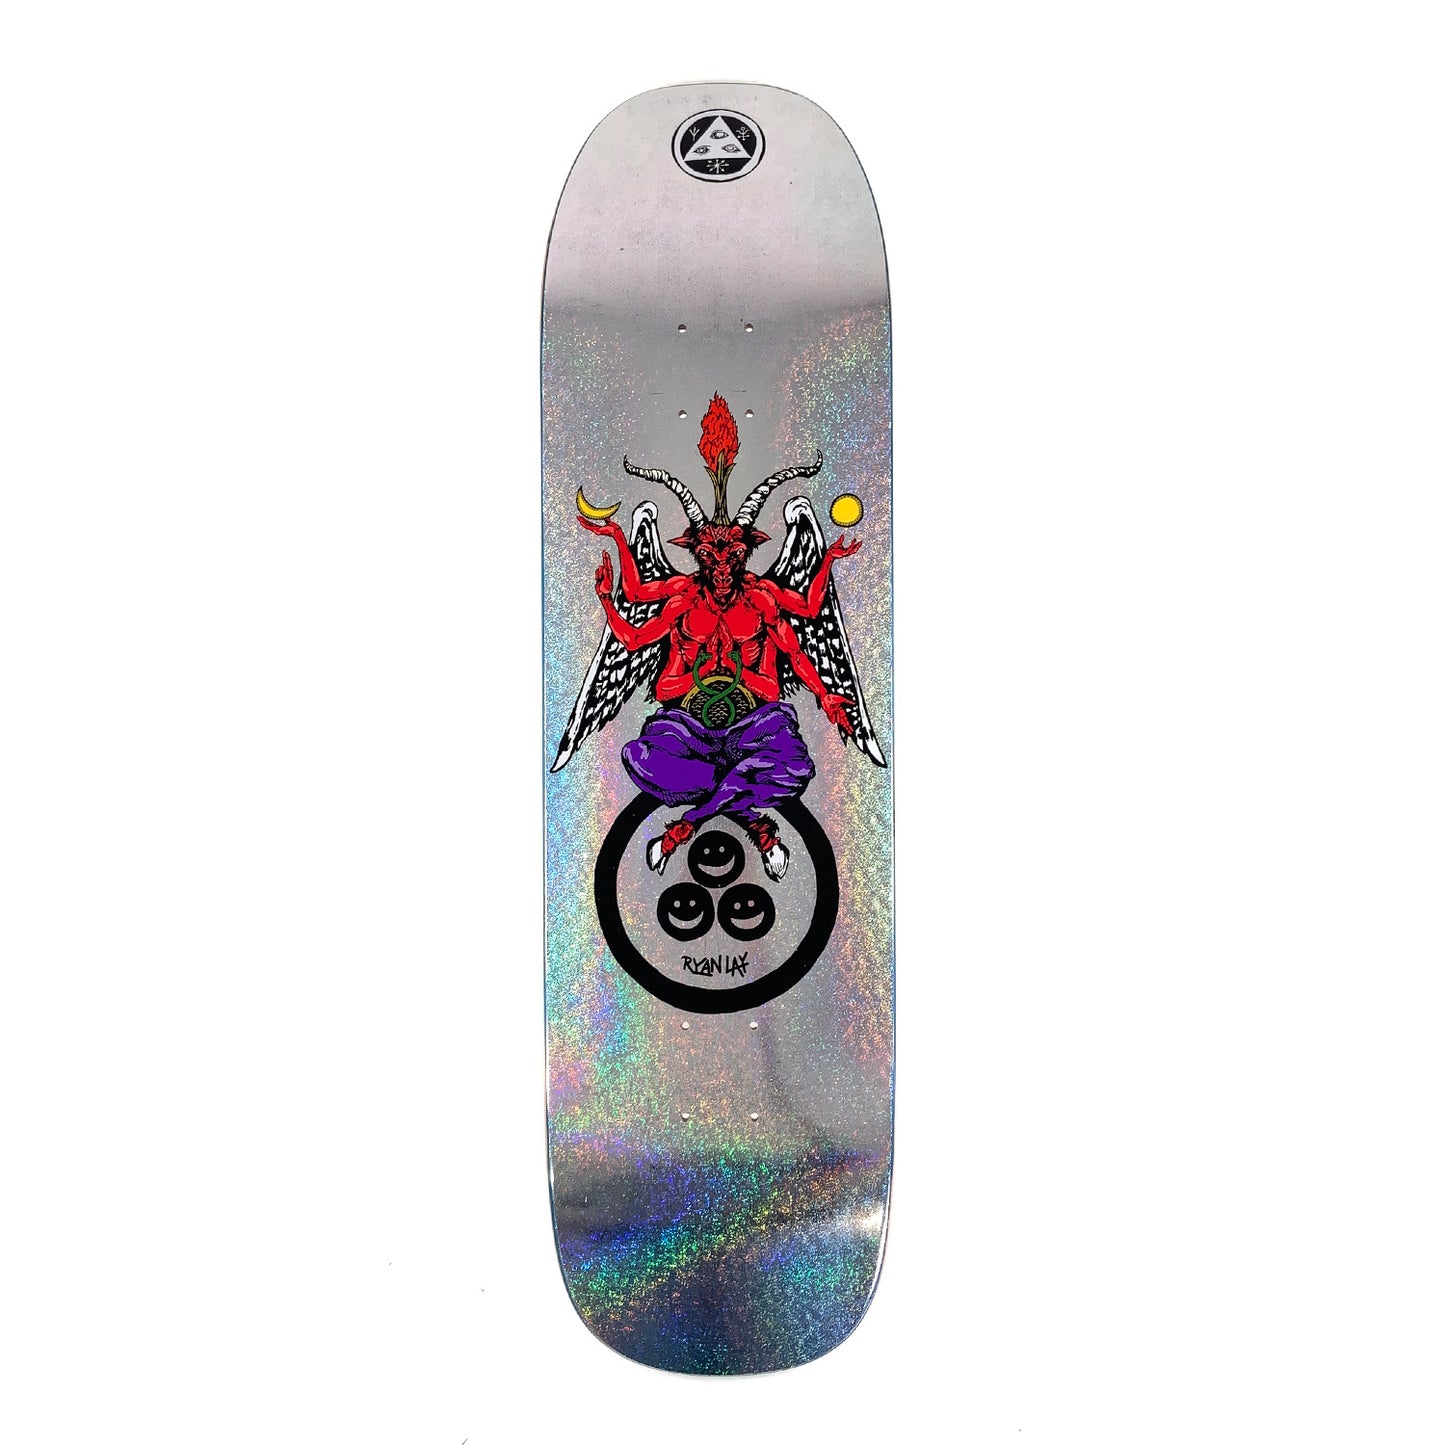 Welcome 8.6" Bapholit - Ryan Lay Pro Model on Stonecipher - Glitter Prism Foil - Prime Delux Store